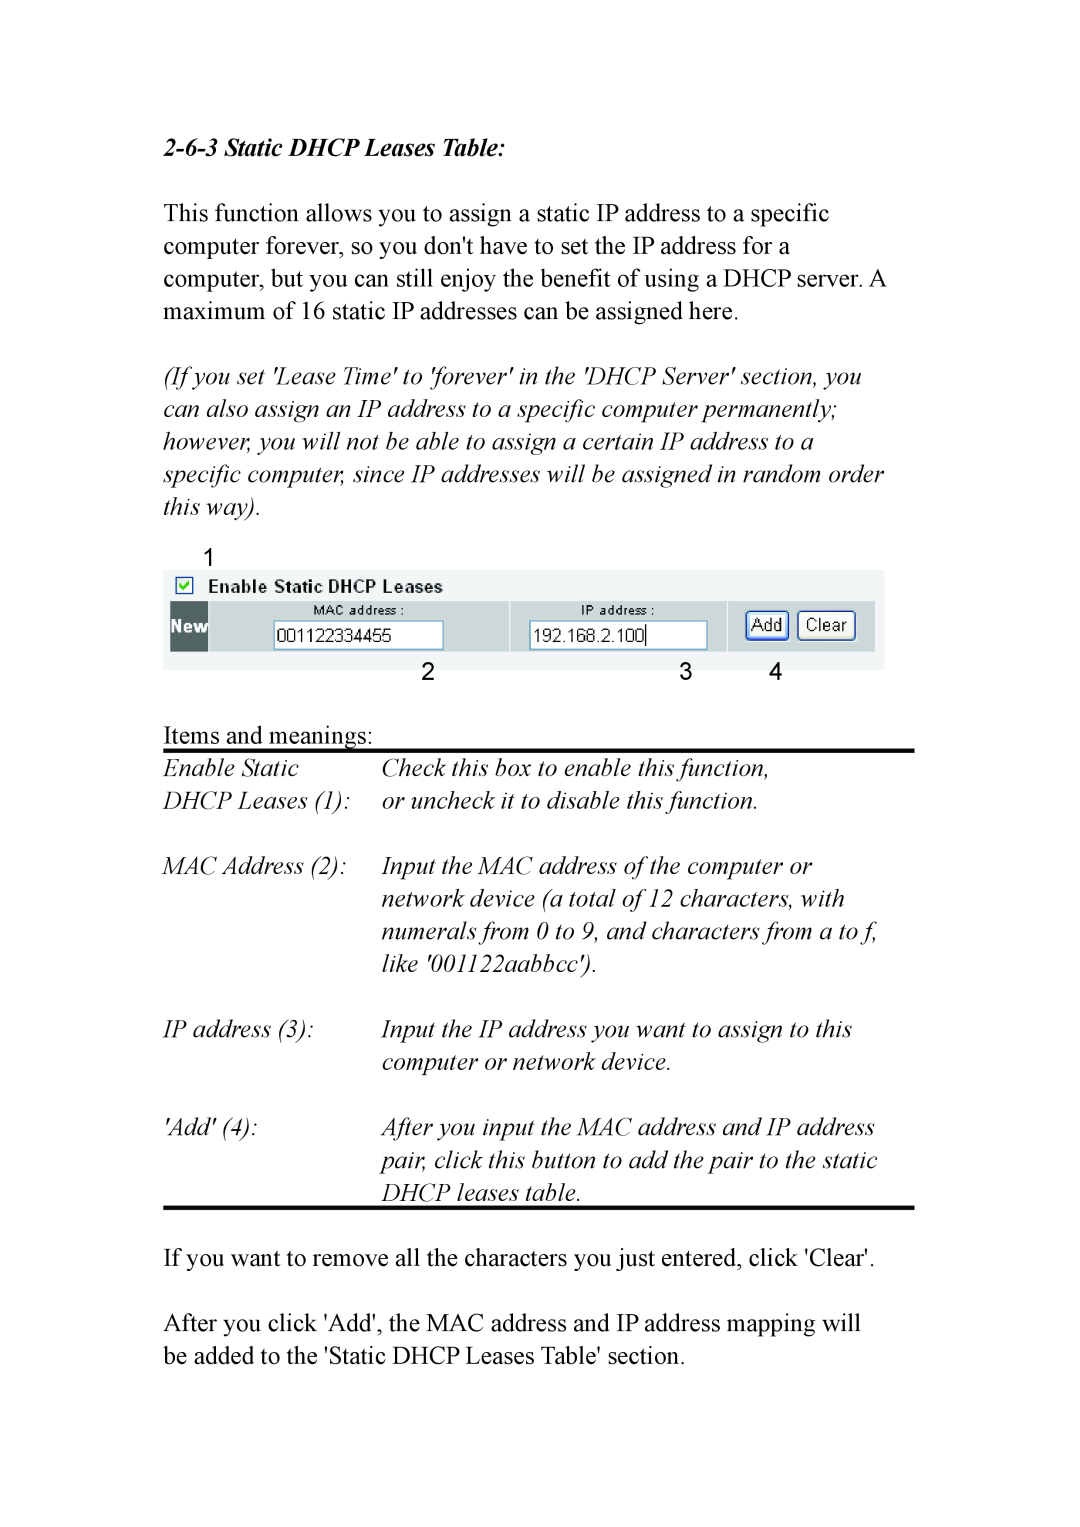 Intellinet Network Solutions INT-524315-UM-0808-1 user manual Static DHCP Leases Table 